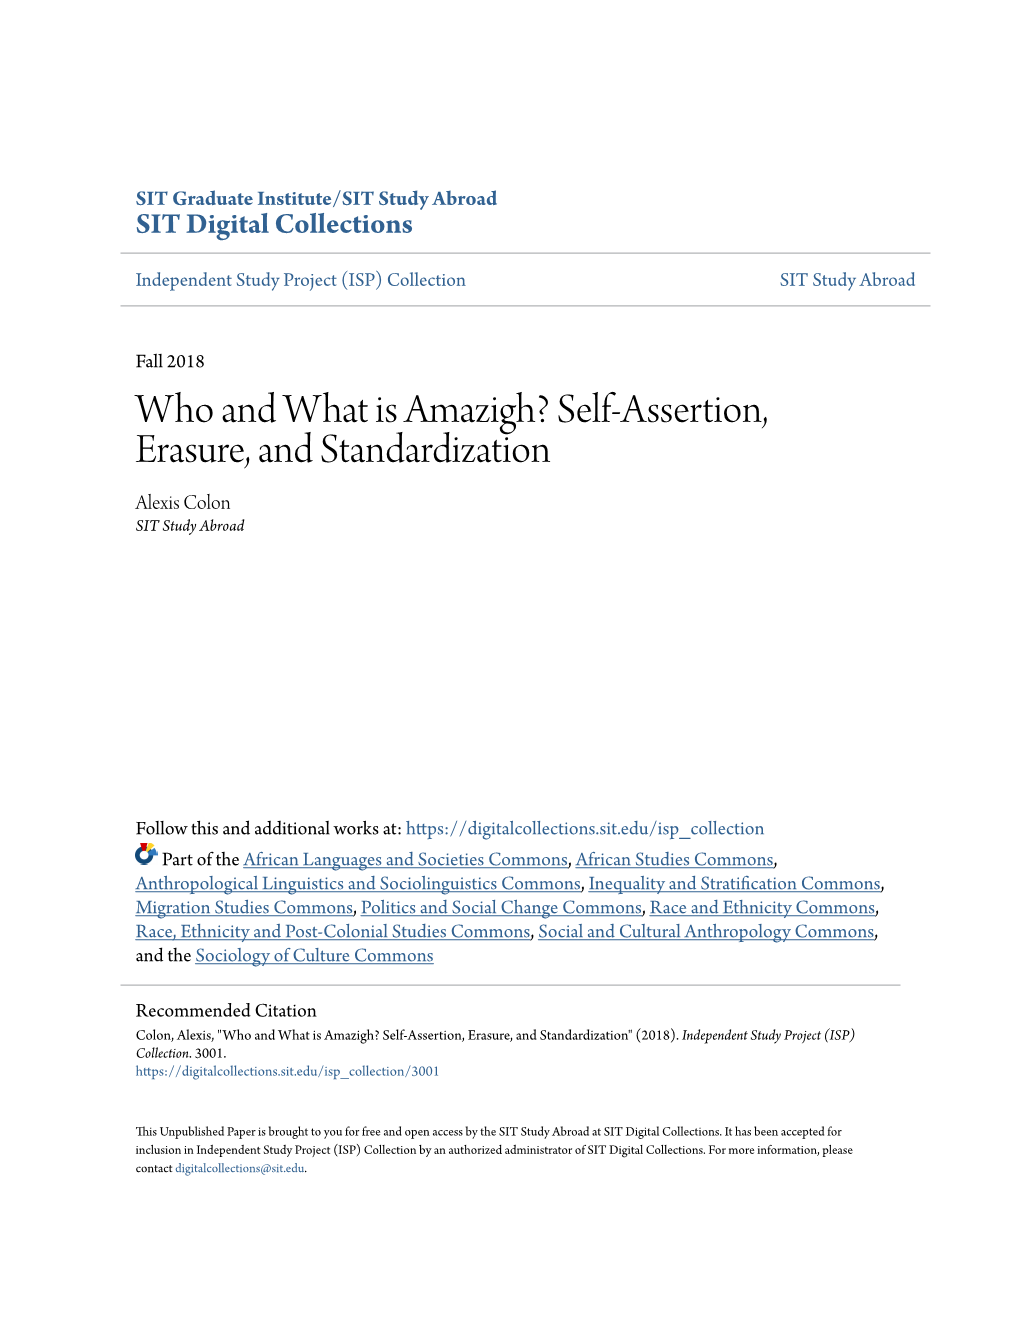 Who and What Is Amazigh? Self-Assertion, Erasure, and Standardization Alexis Colon SIT Study Abroad